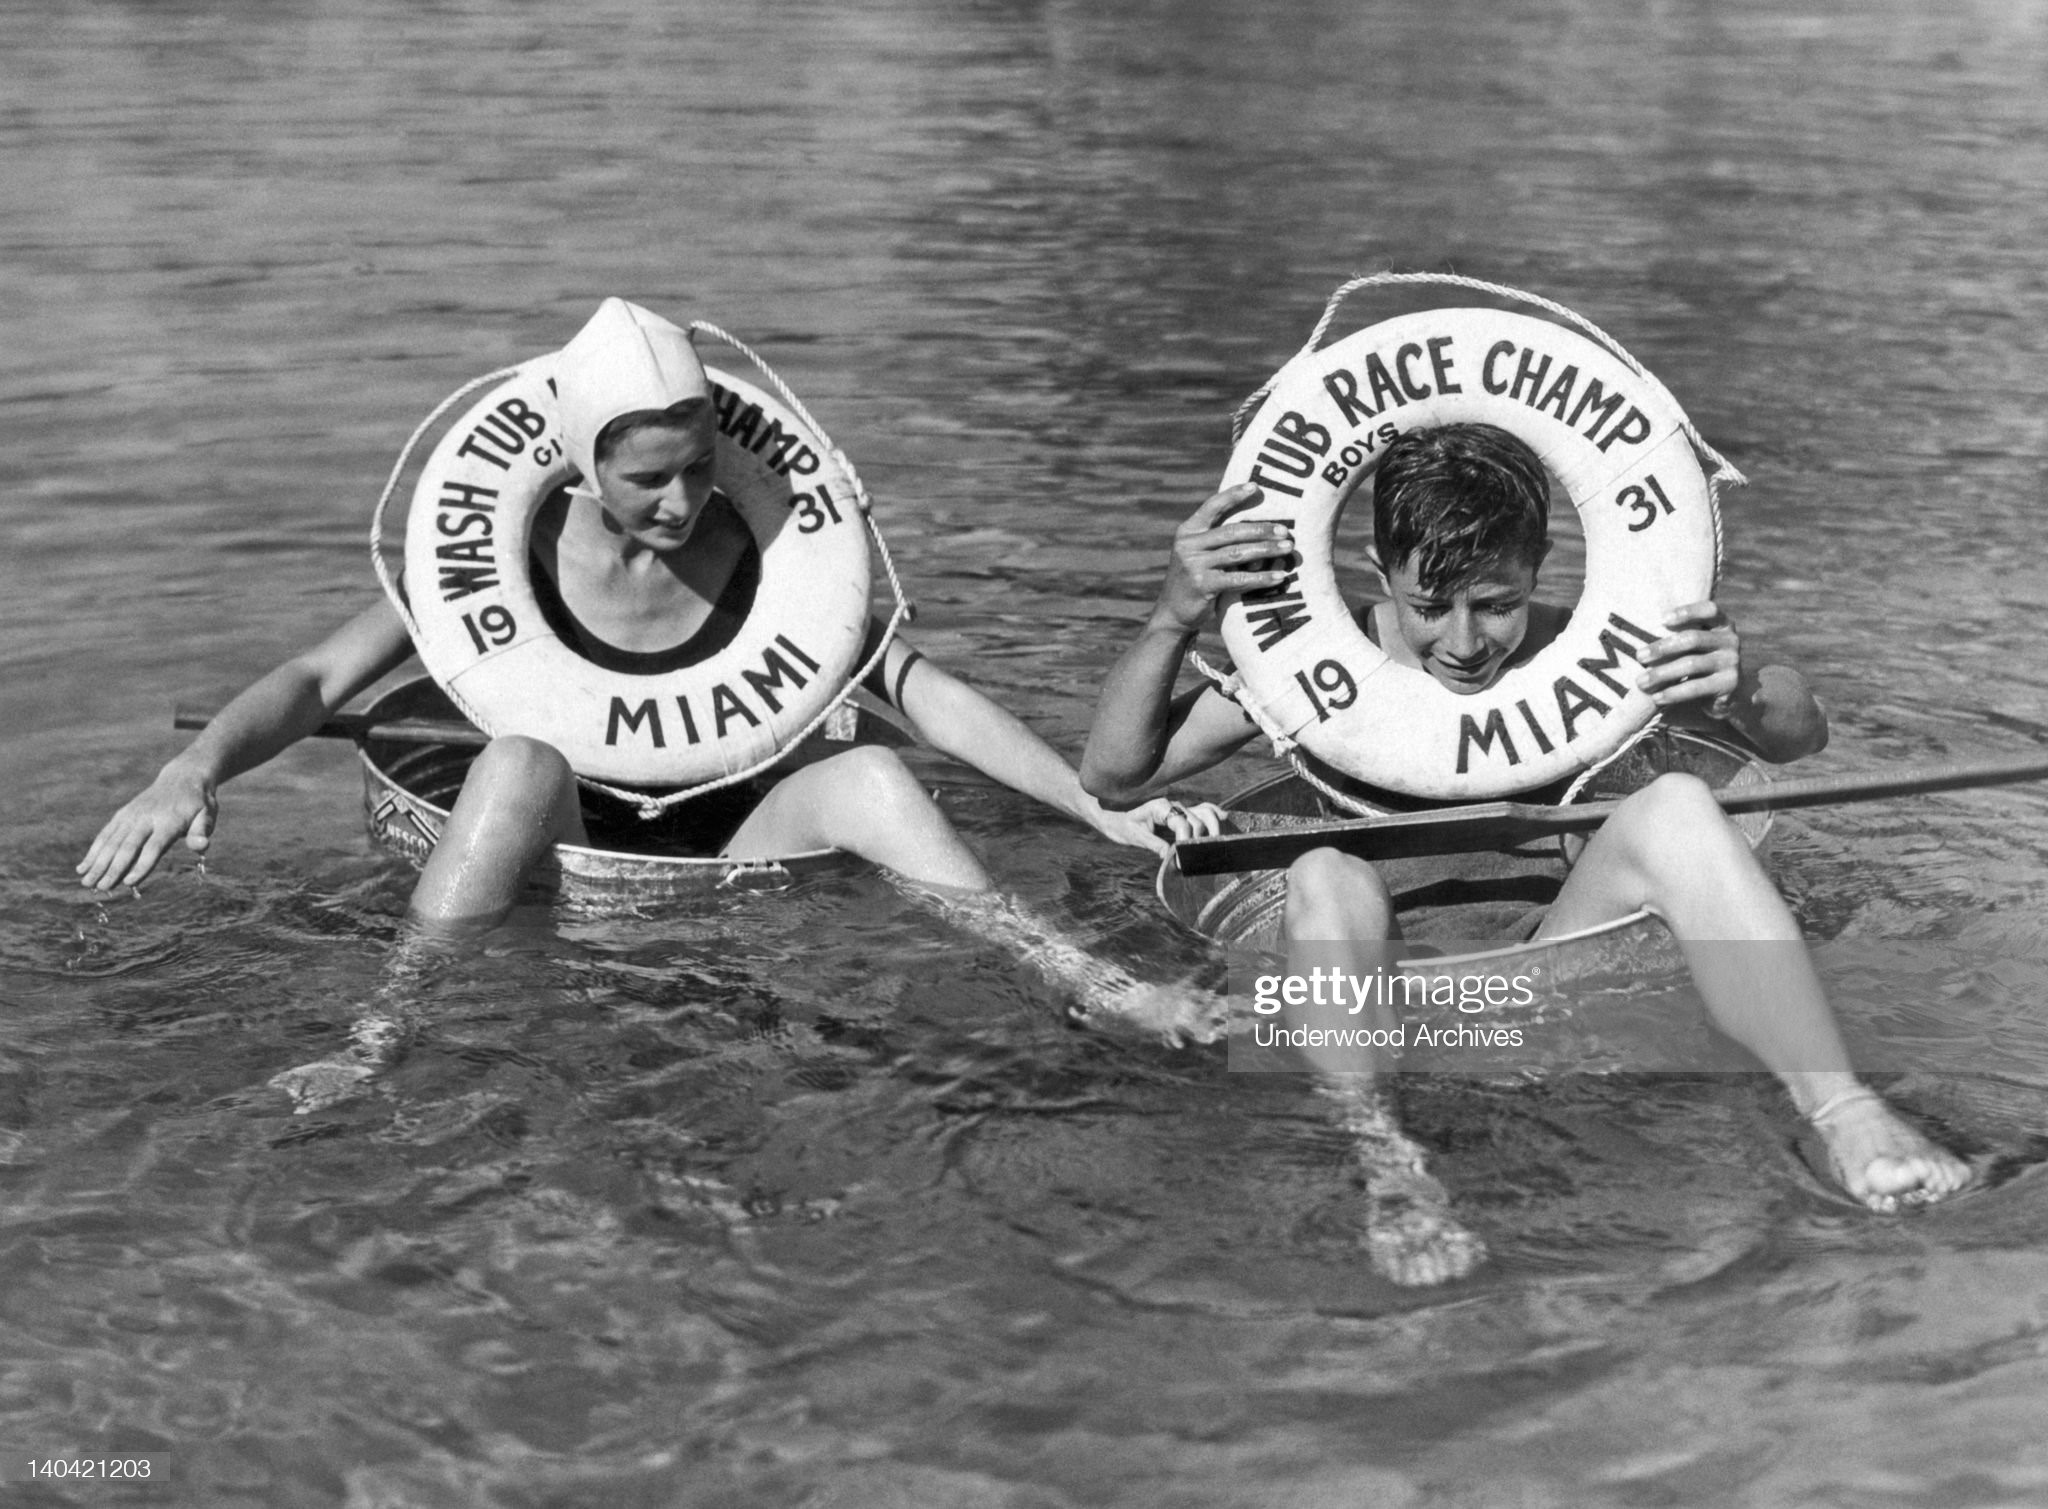 The respective boy and girl winners of the 1931 Miami, Florida Washtub Races on January 01, 1931. 